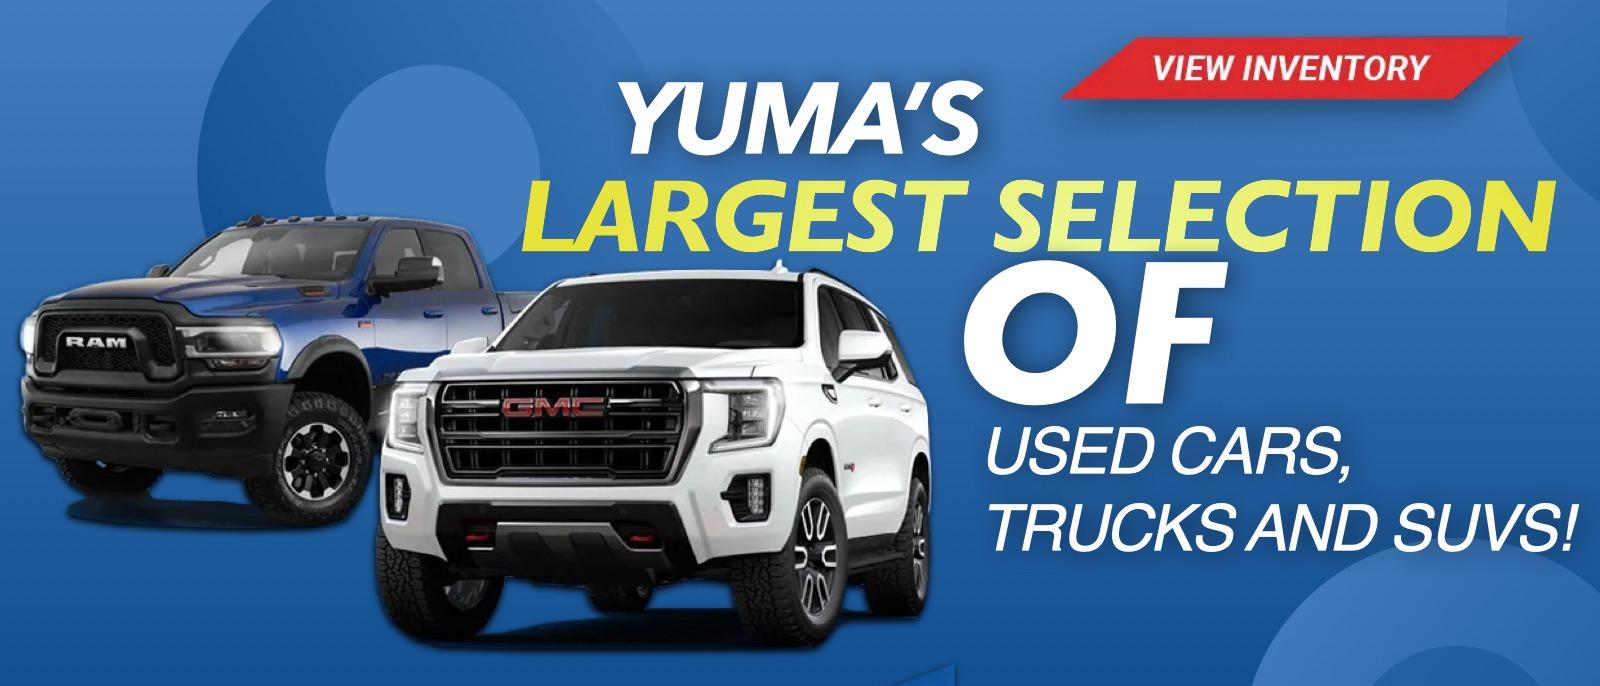 Yuma's Largest Selection of Pre-Owned Inventory!